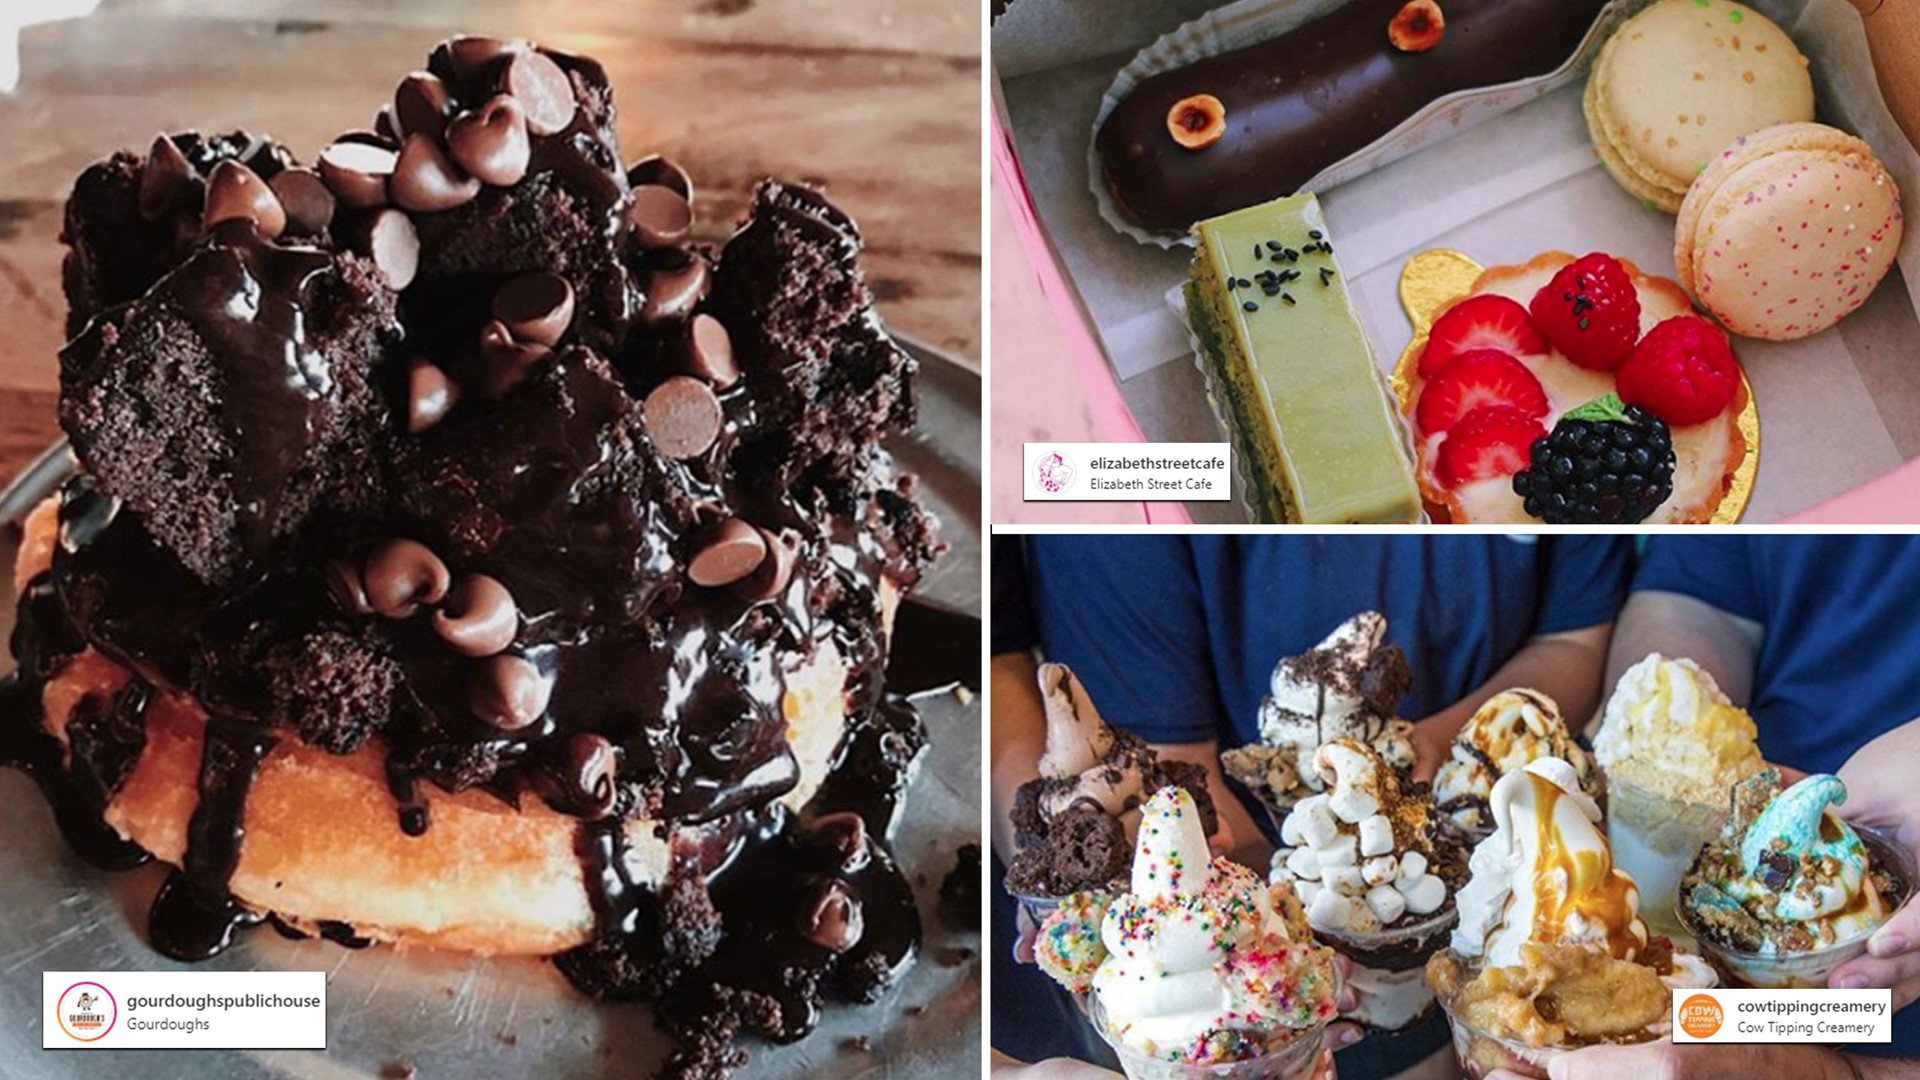 Here's a list of Austin places you can grab a sweet treat from.